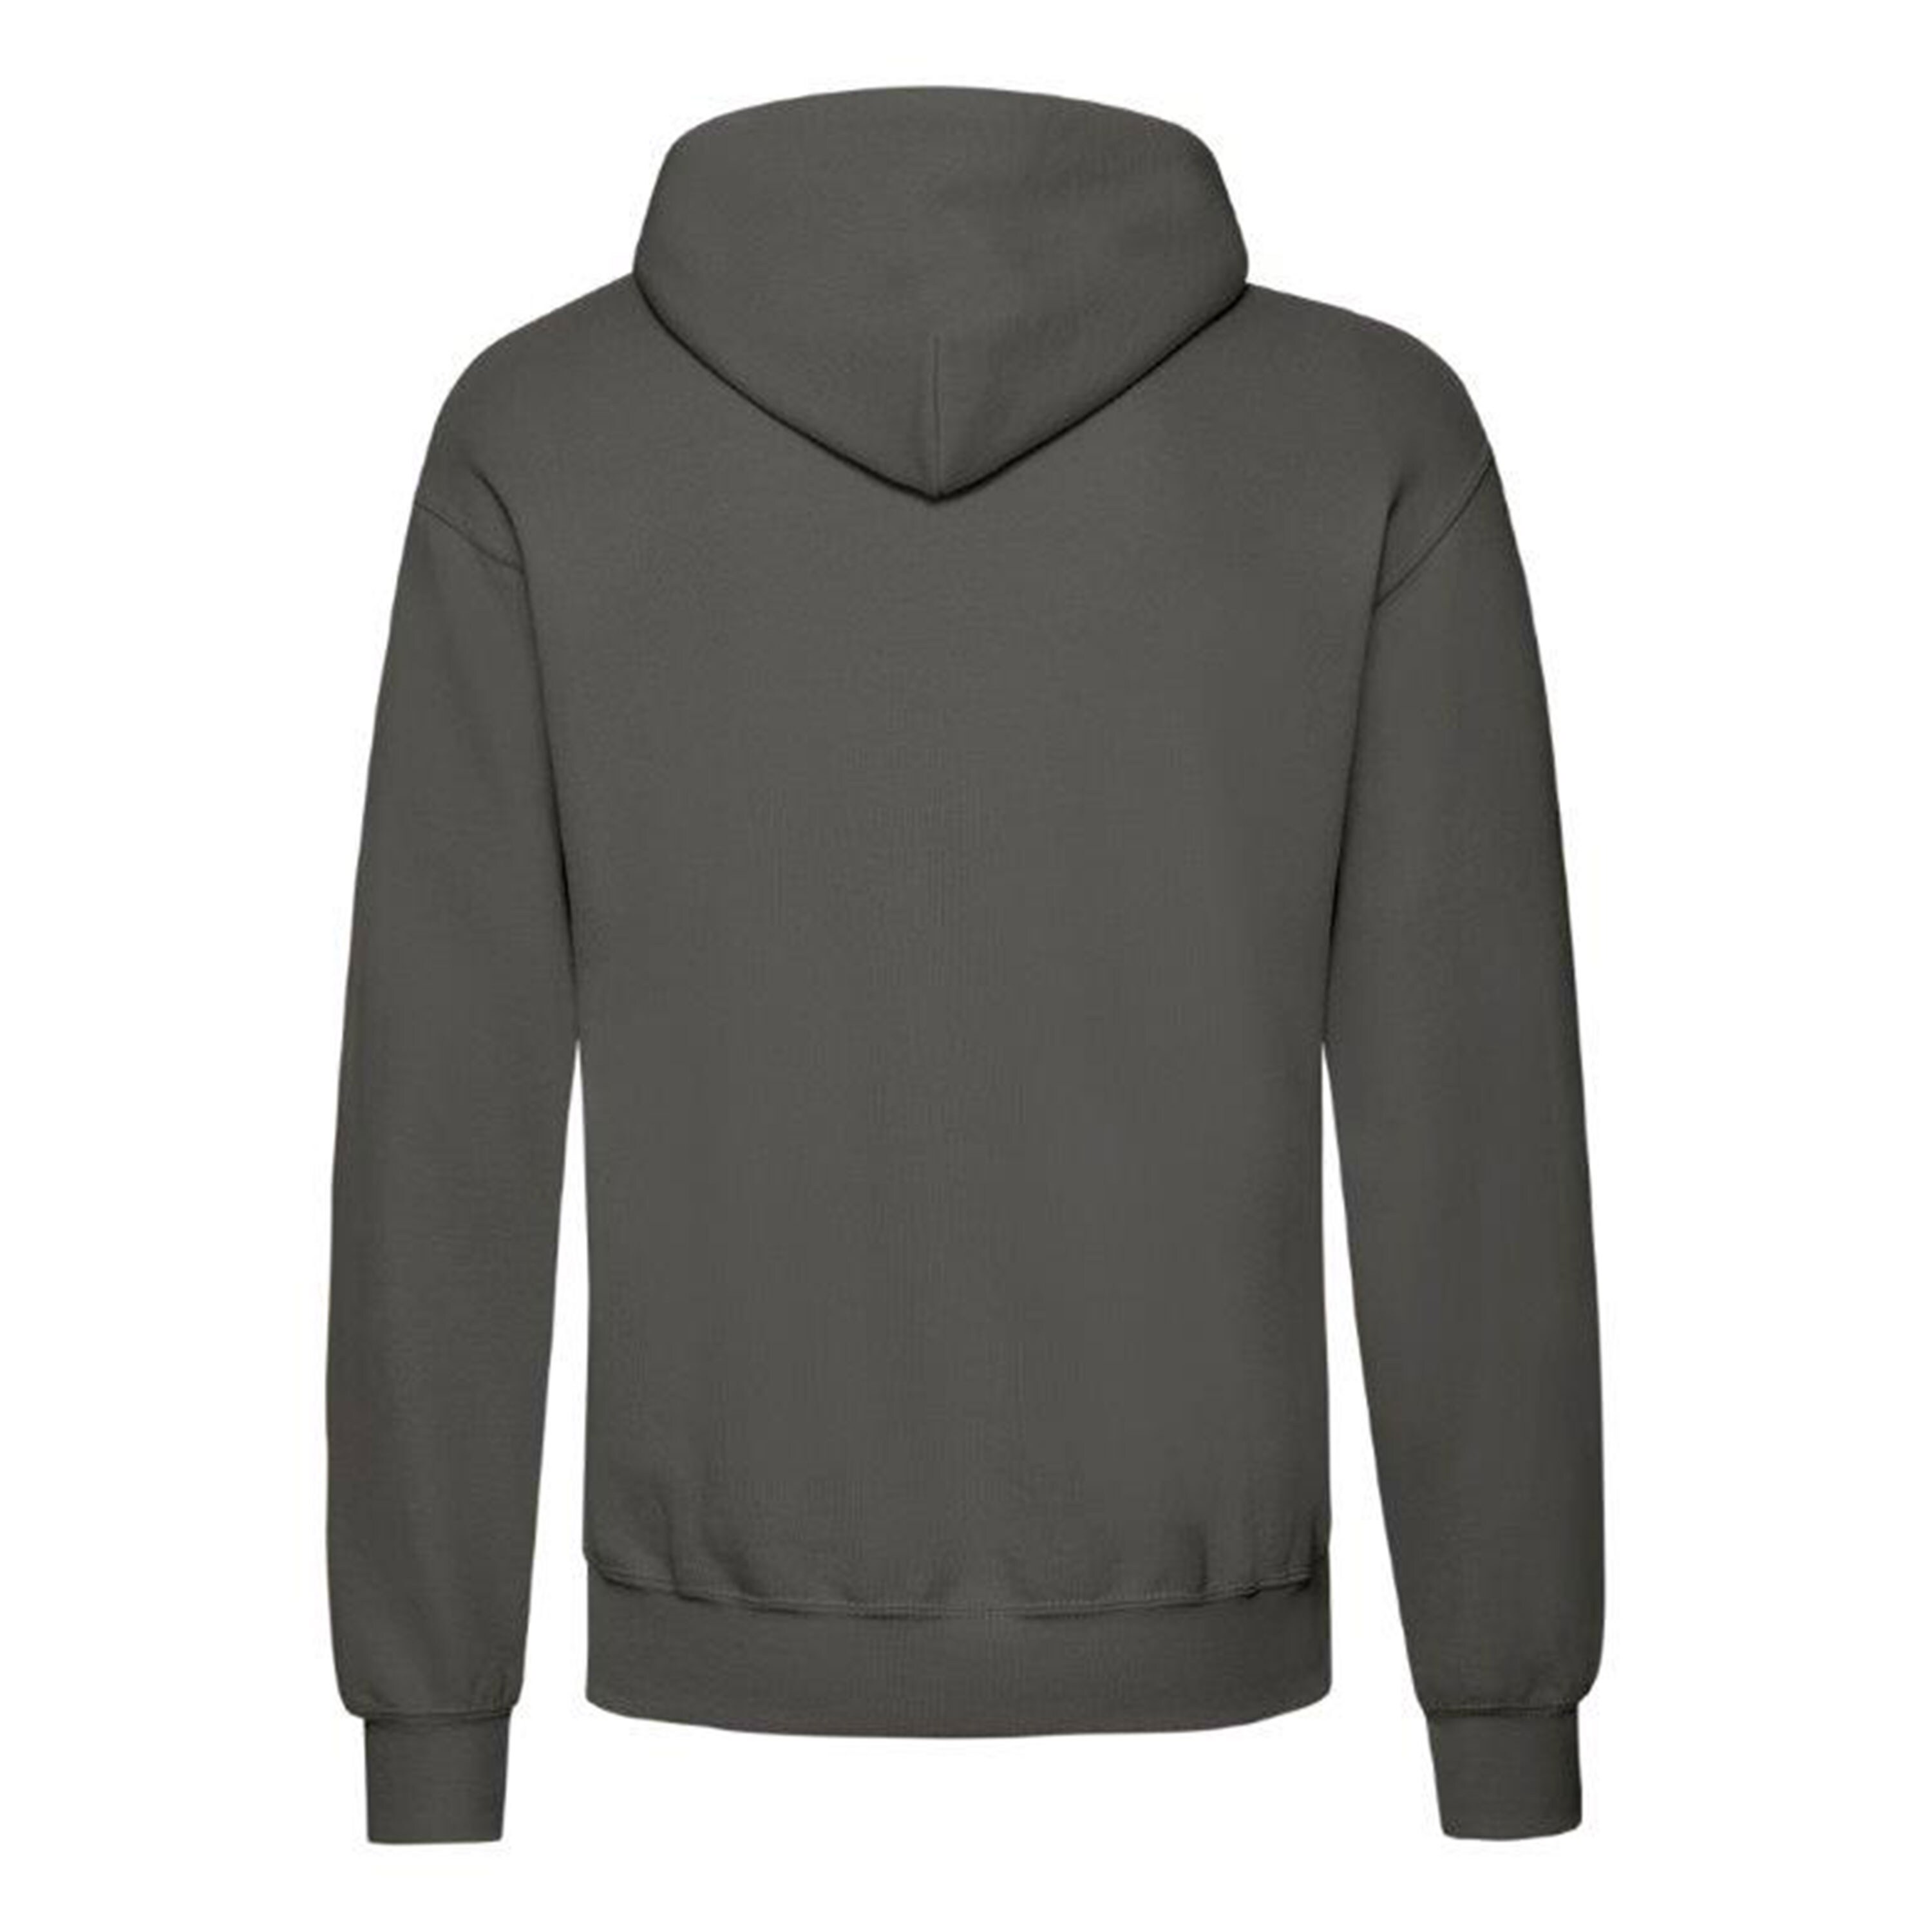 Purchase the Fruit of the Loom Classic Hooded Sweatshirt graphit